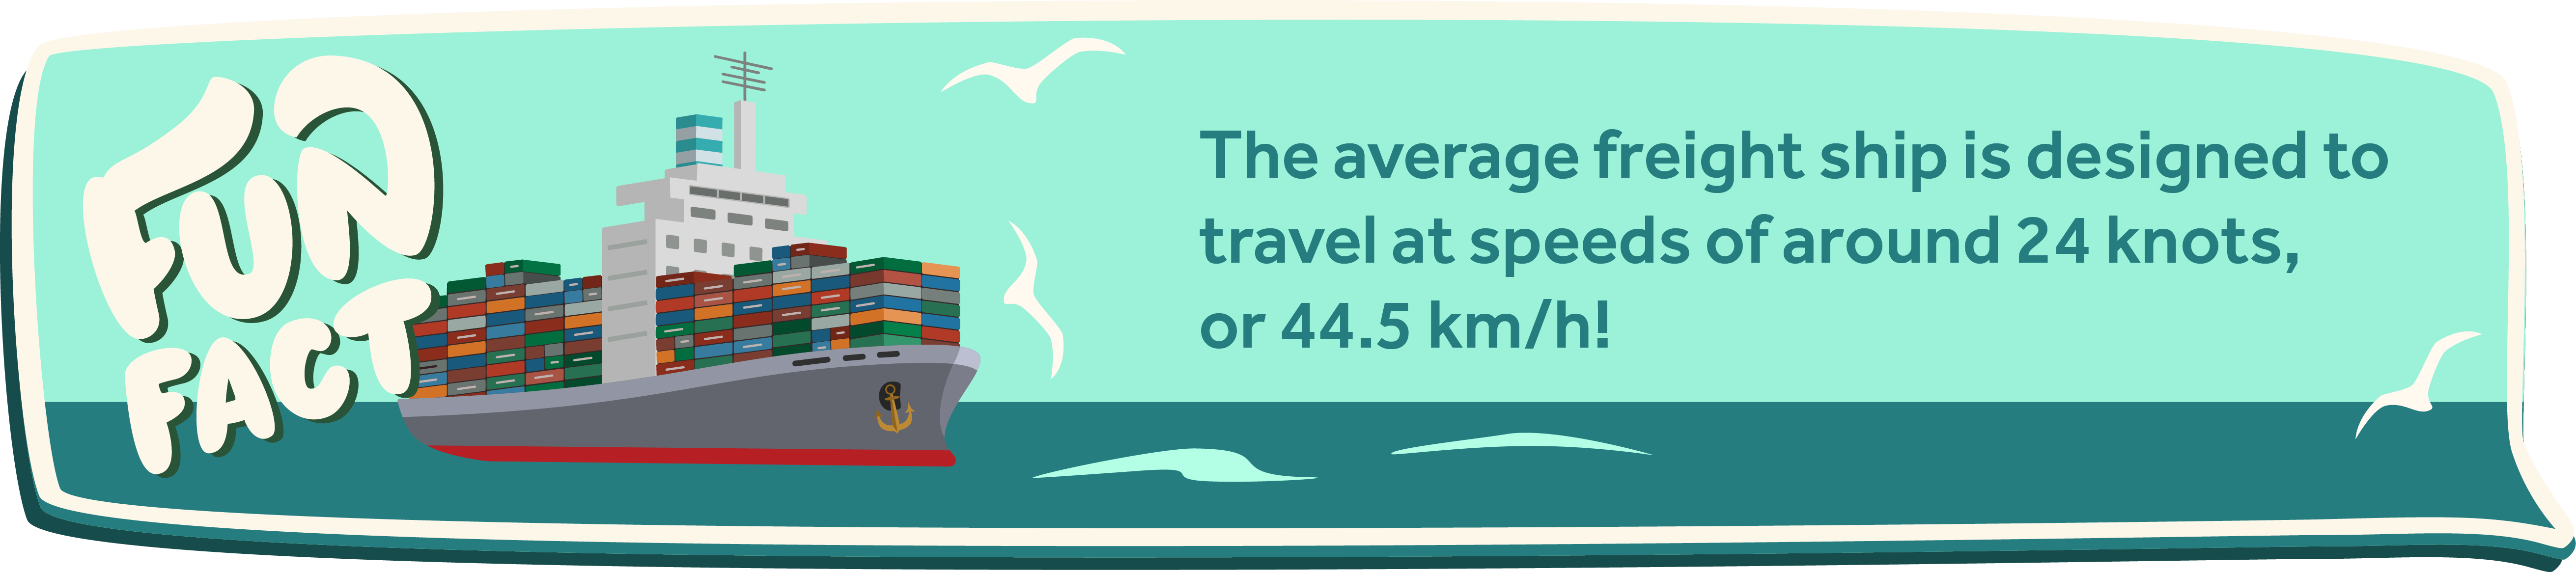 The average freight ship is designed to travel at speeds of around 24 knots, or 44.5 km/h!